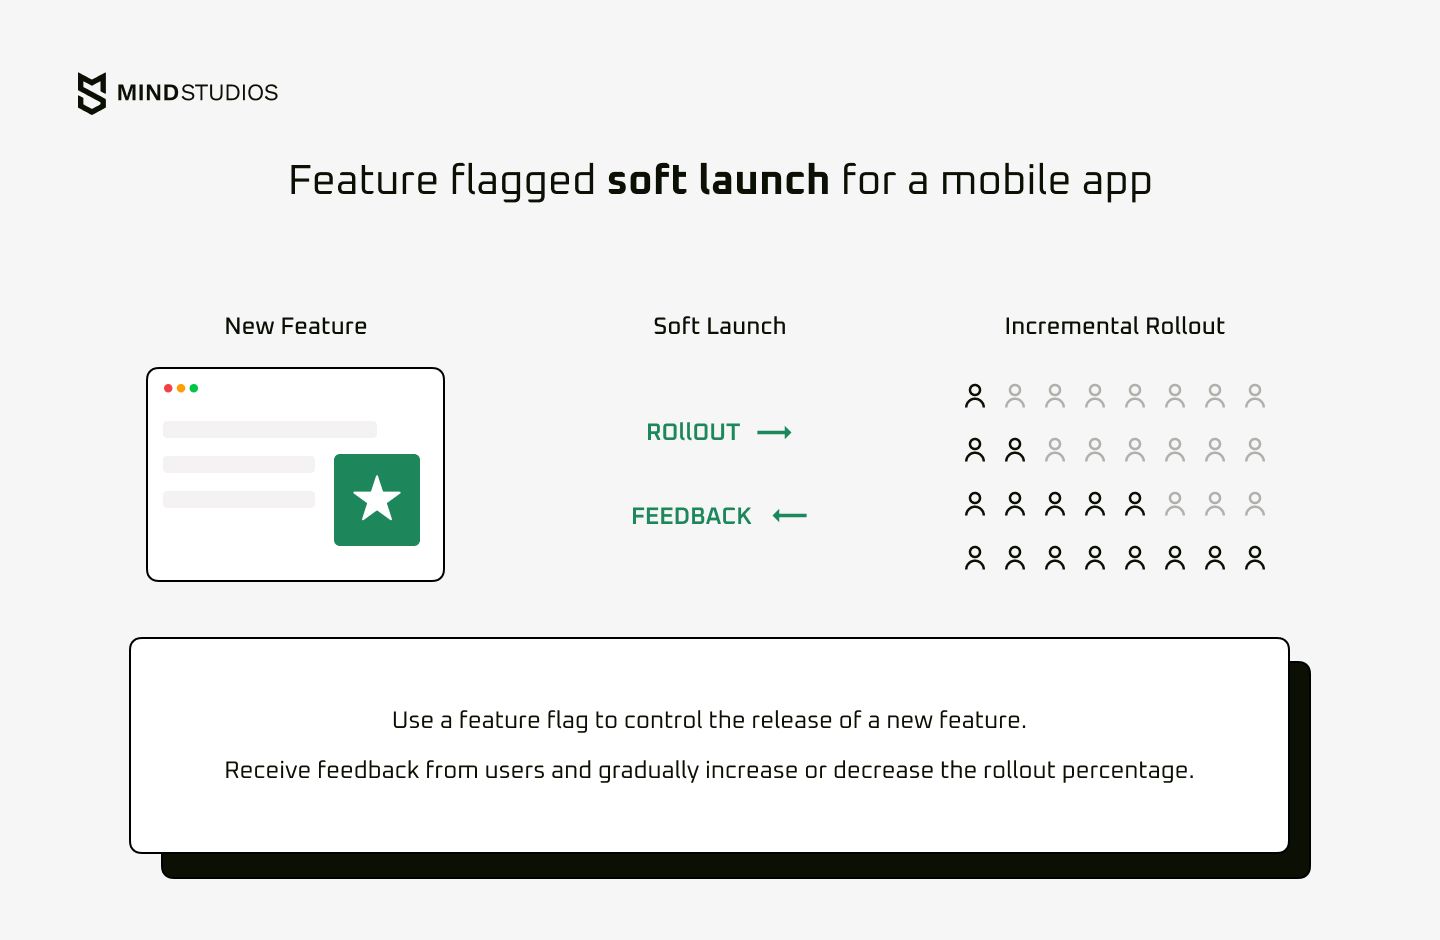 Feature flagged soft launch for a mobile app